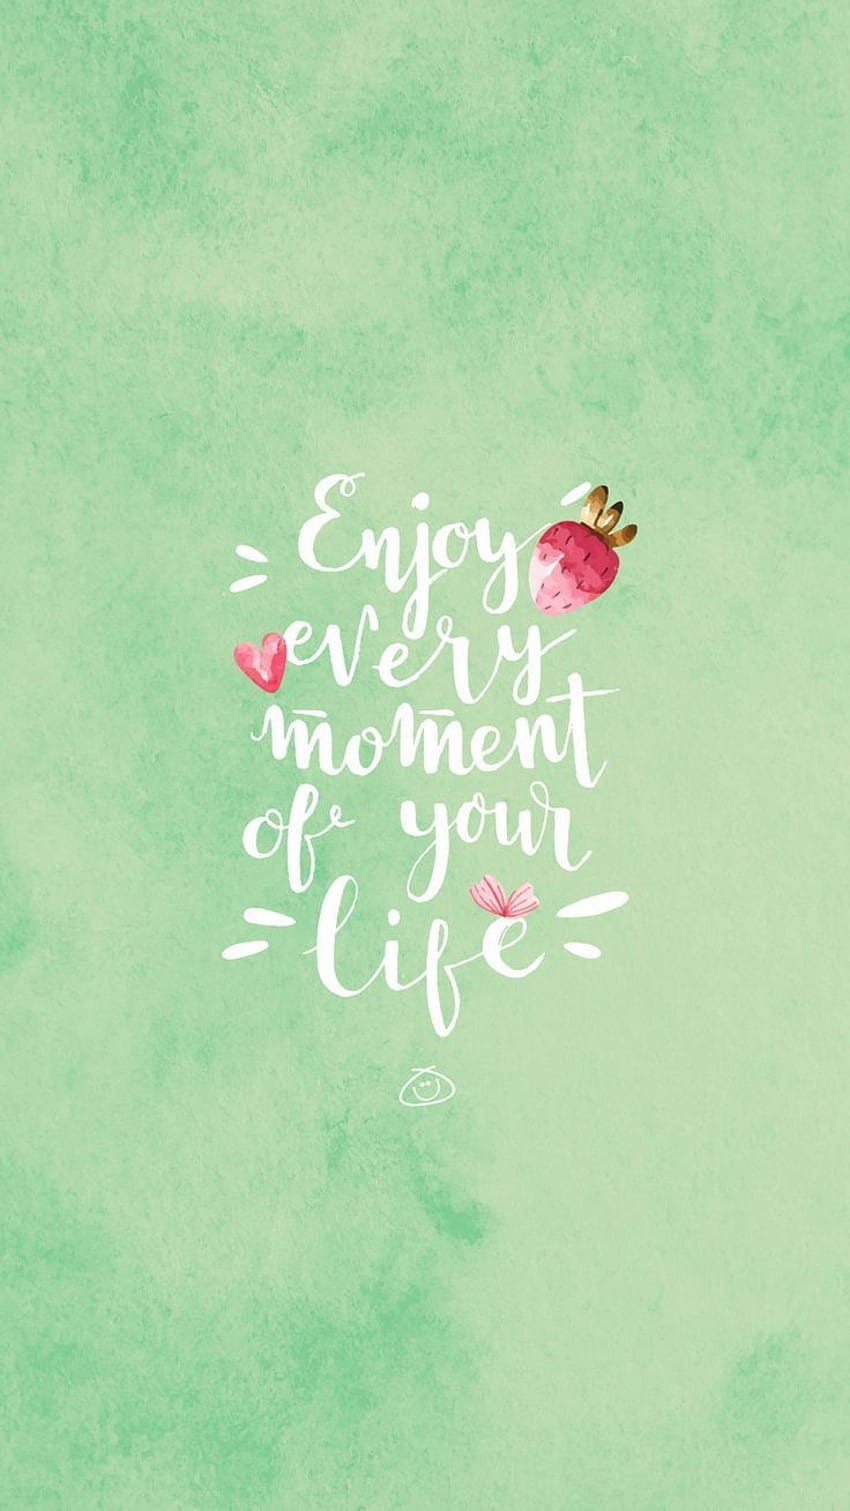 Best Inspirational Positive Quotes : Colorful Smartphone – Enjoy every moment of your life. Cute quotes, Phone quotes, Positive quotes, Inspirational Quotes About Life HD phone wallpaper